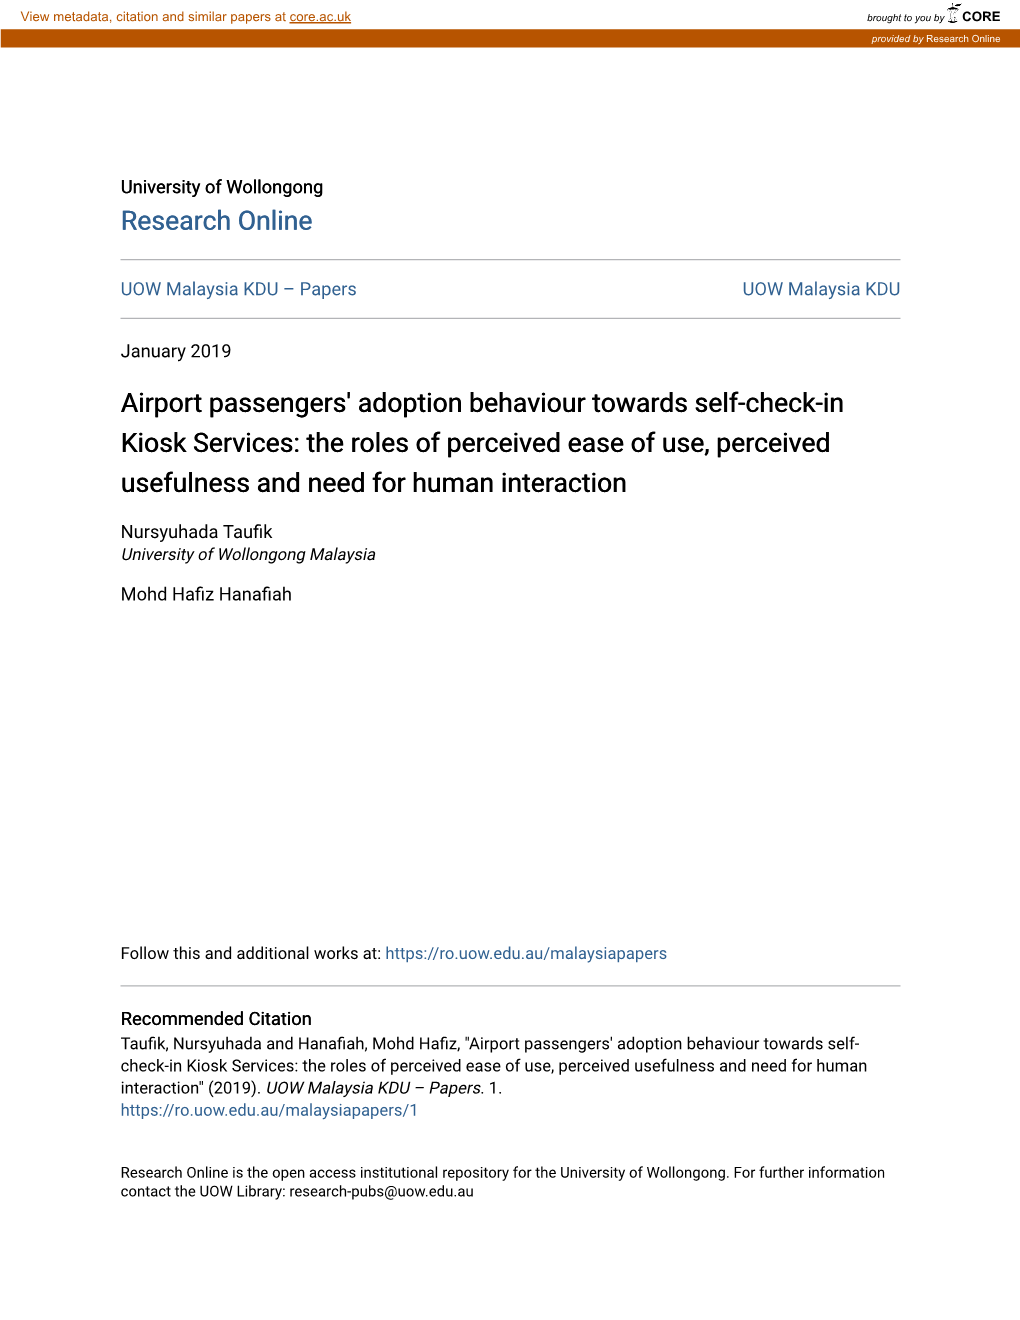 Airport Passengers' Adoption Behaviour Towards Self-Check-In Kiosk Services: the Roles of Perceived Ease of Use, Perceived Usefulness and Need for Human Interaction